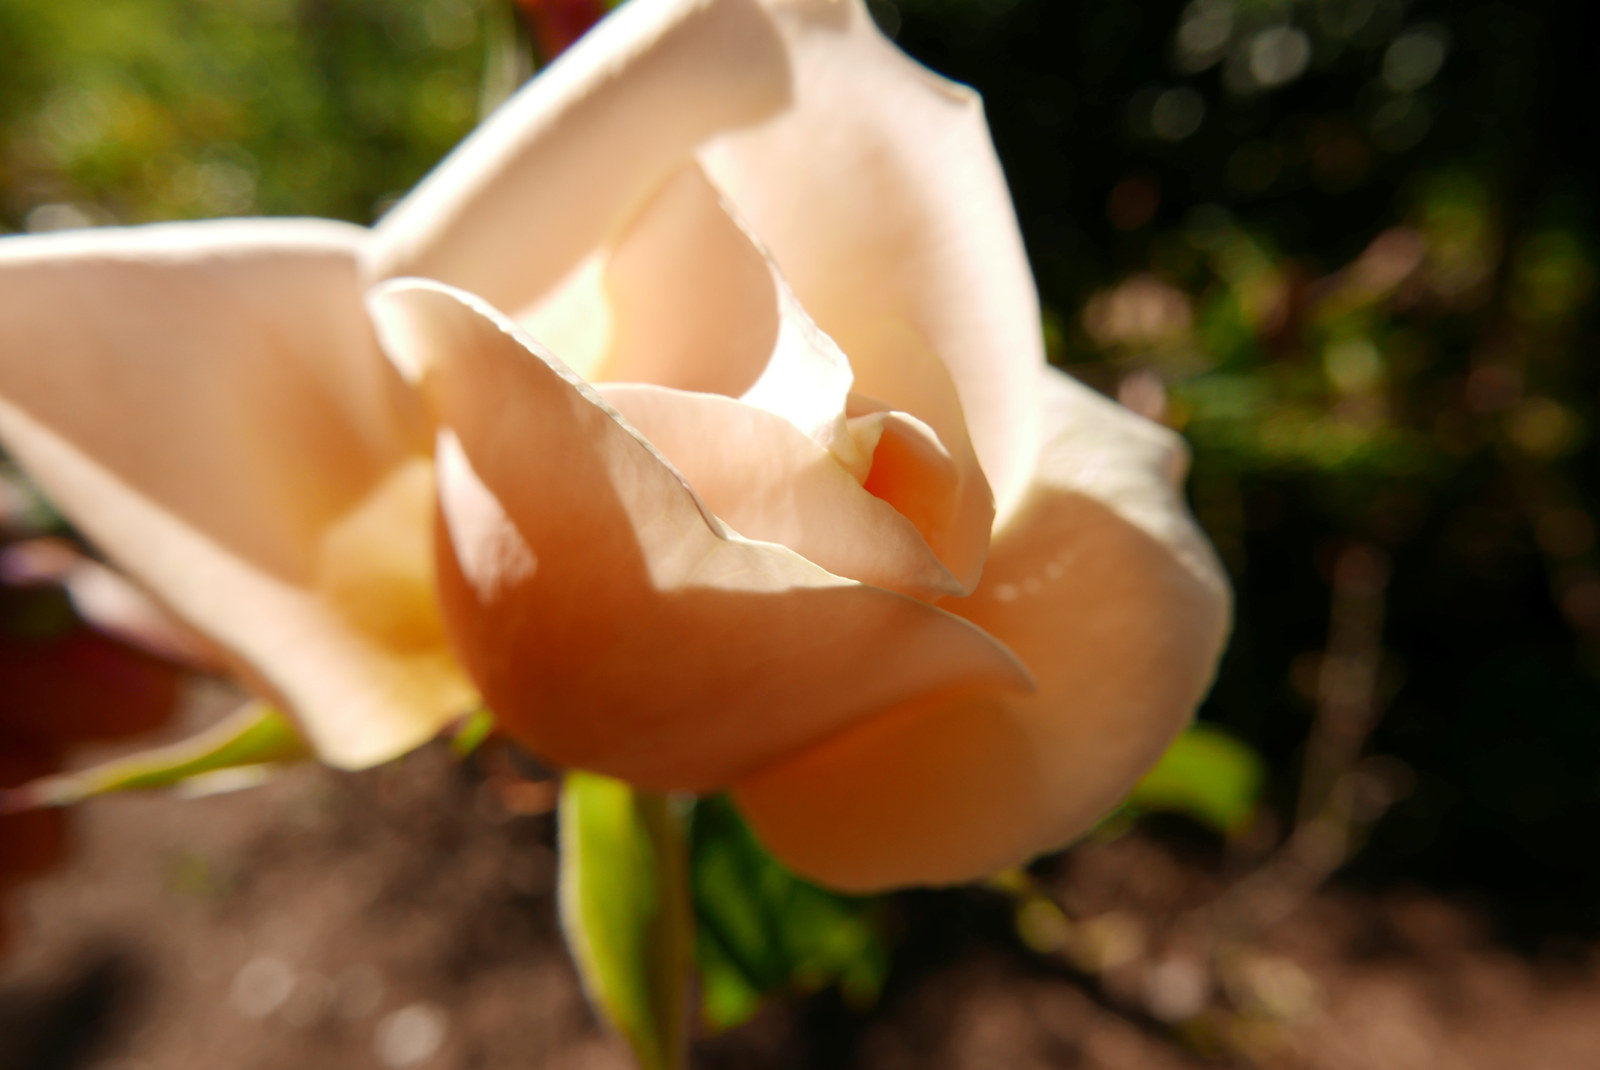 An apricot rose found at Vaucluse House.